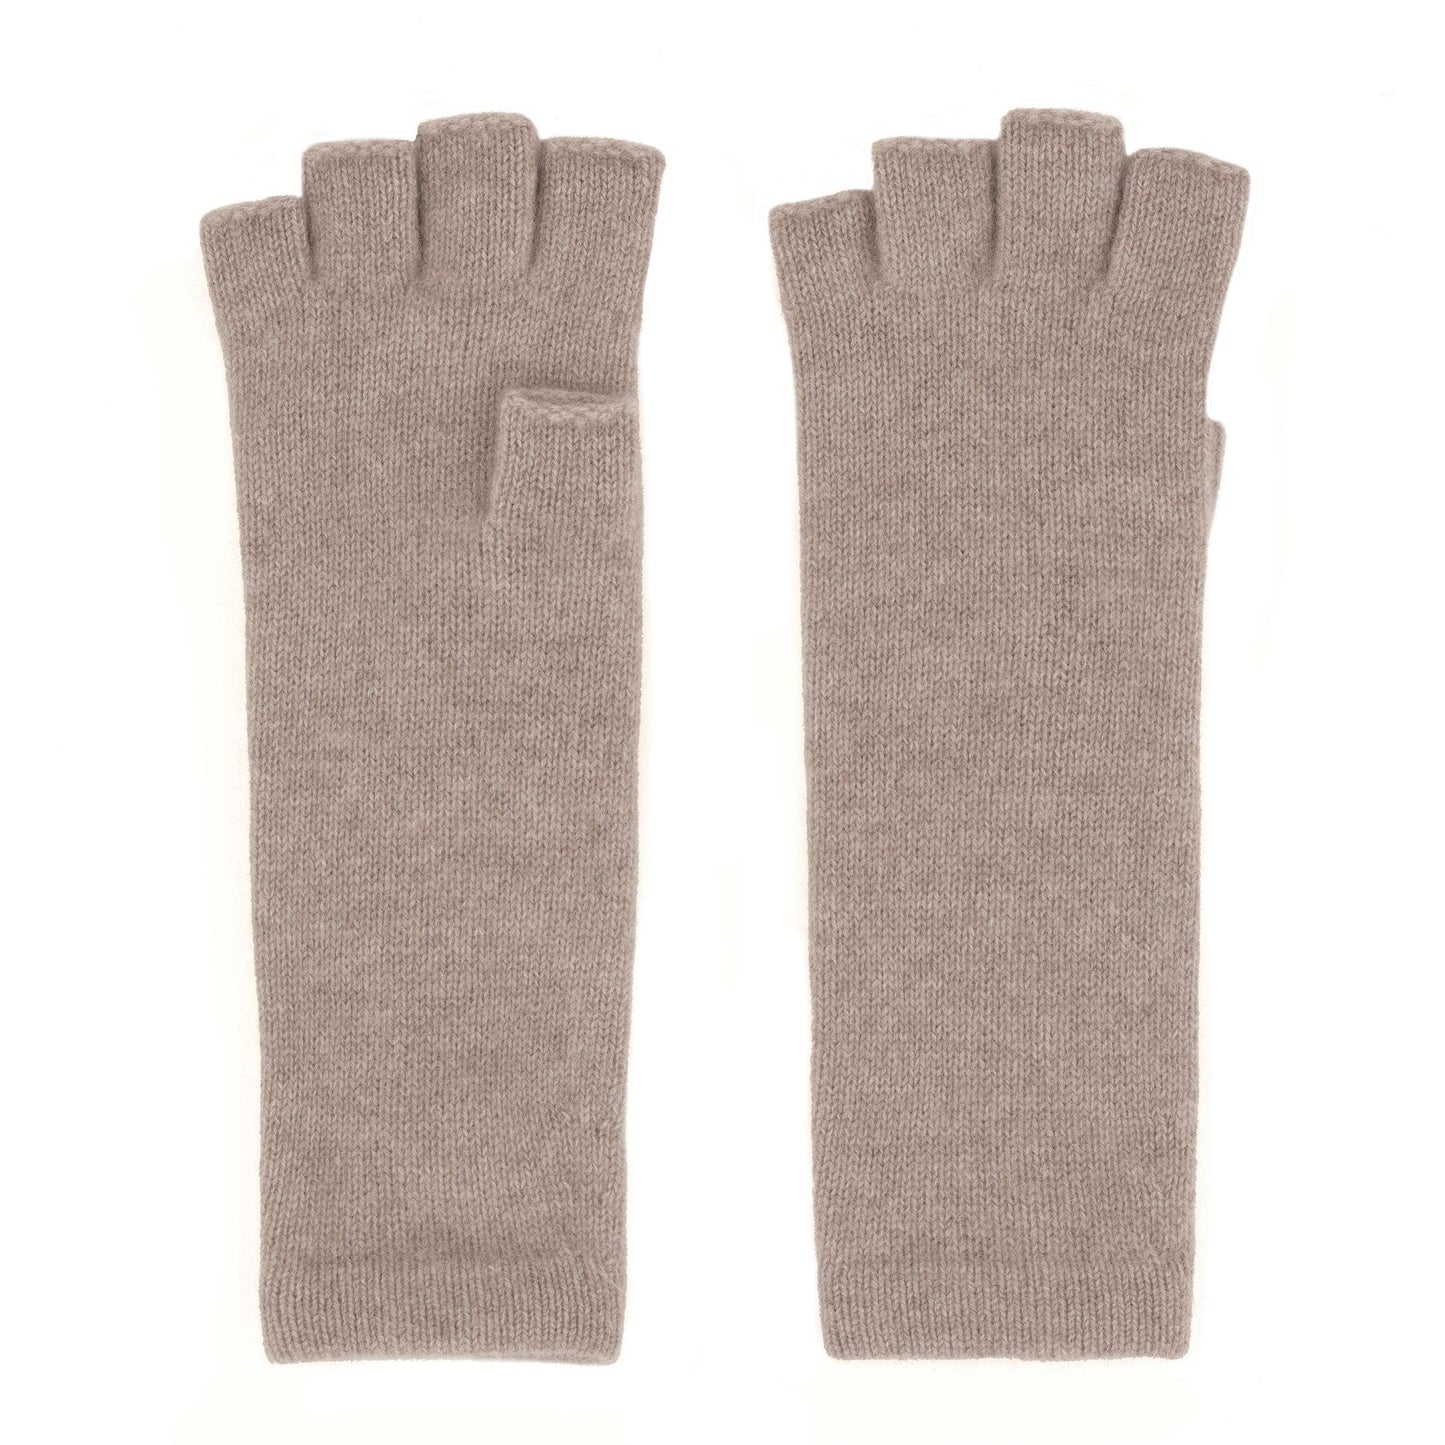 Mittens cashmere - Taupe